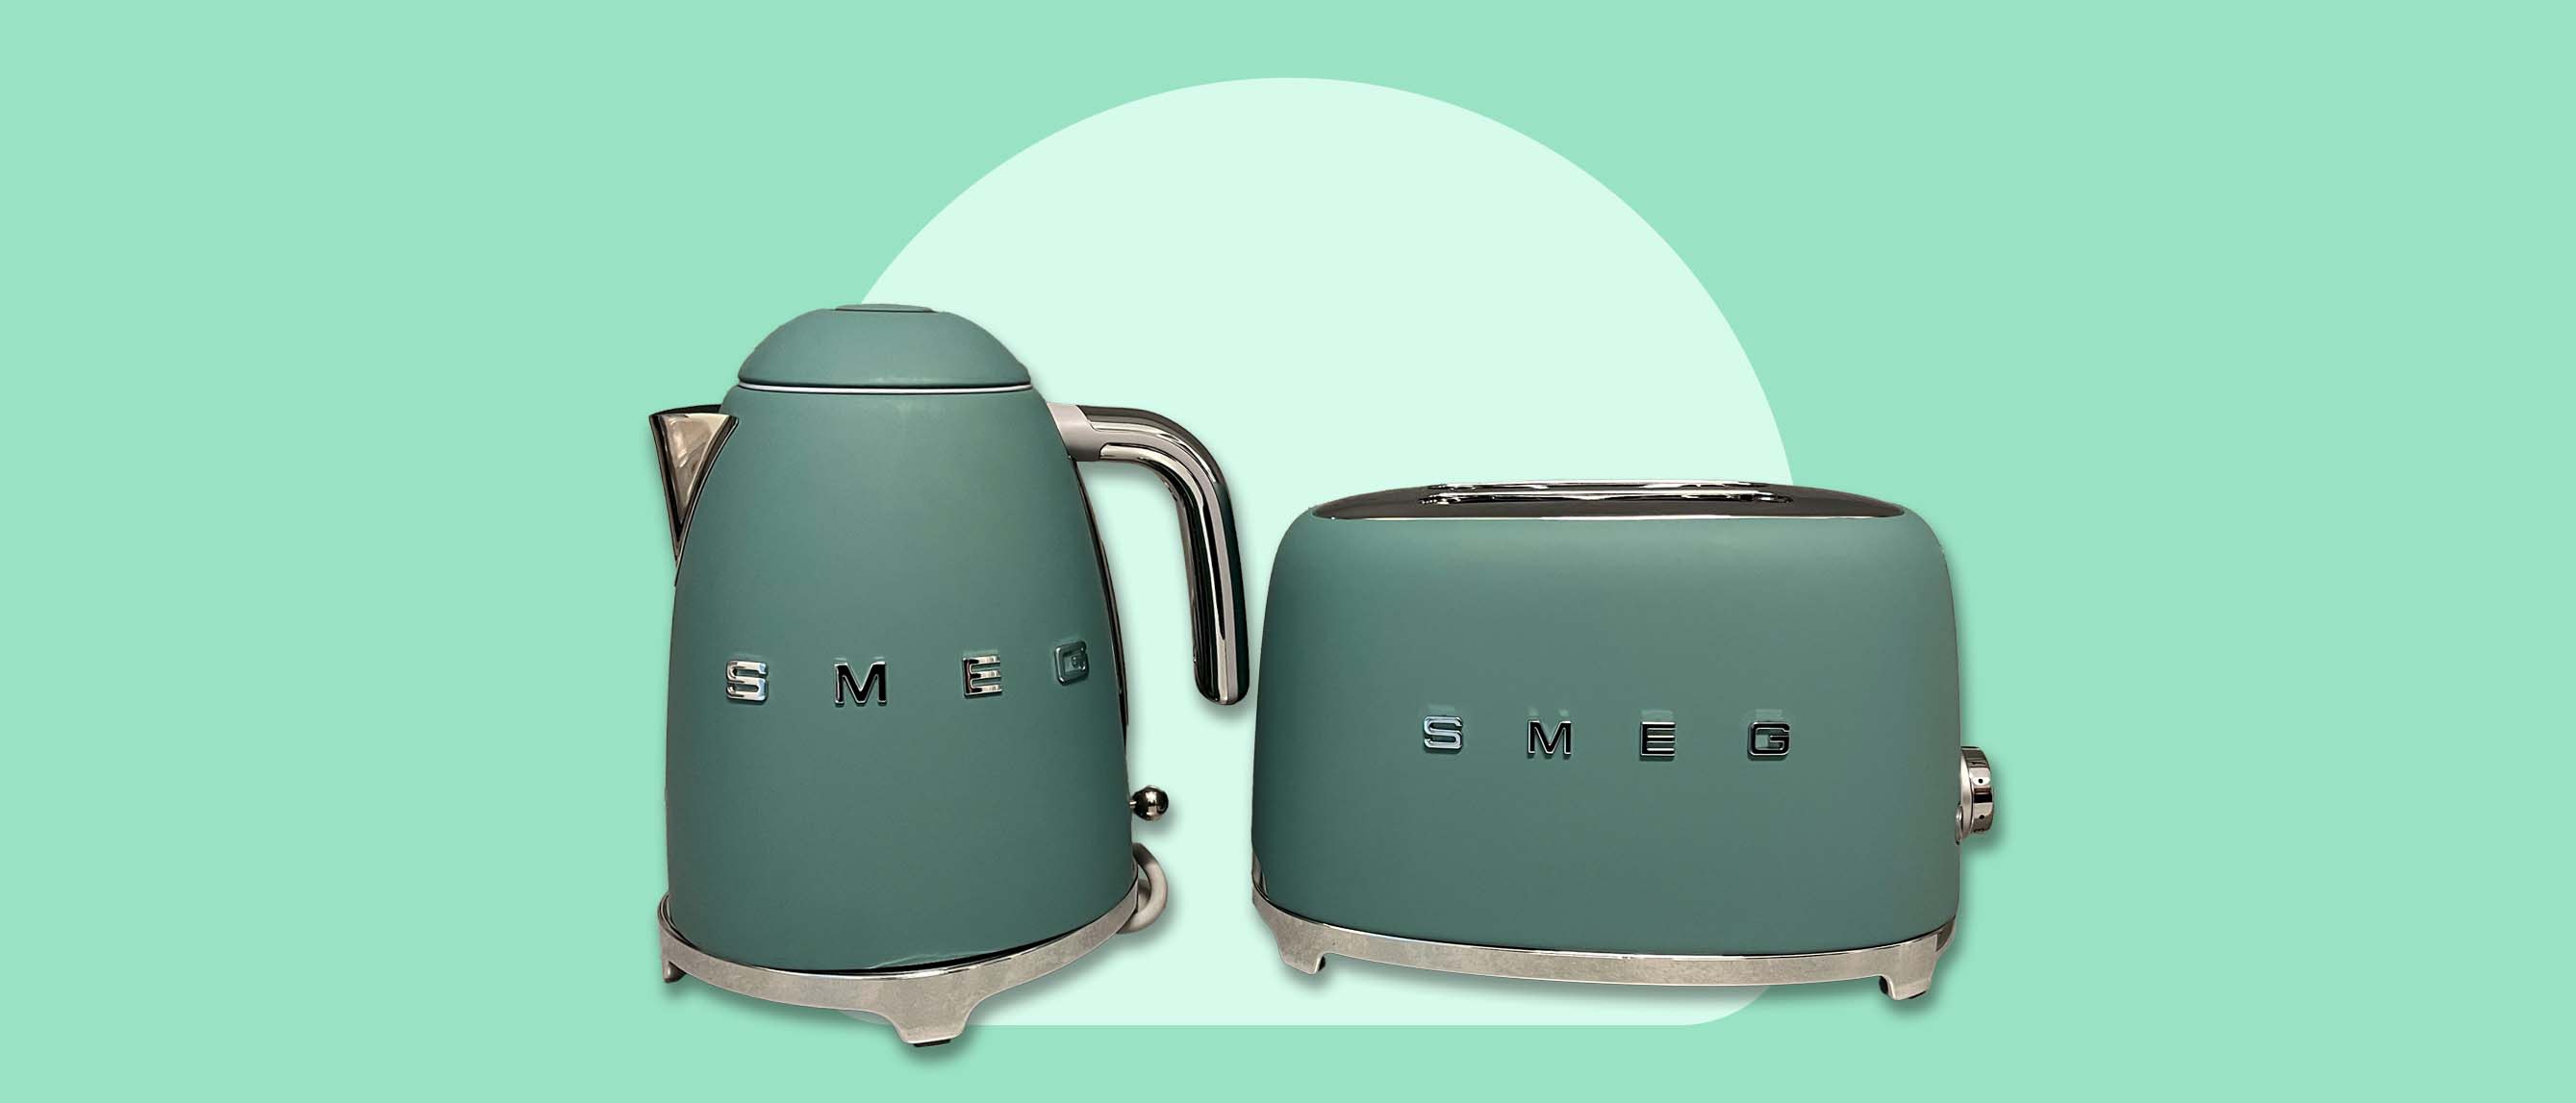 Style over substance? We review the Smeg kettle and toaster set